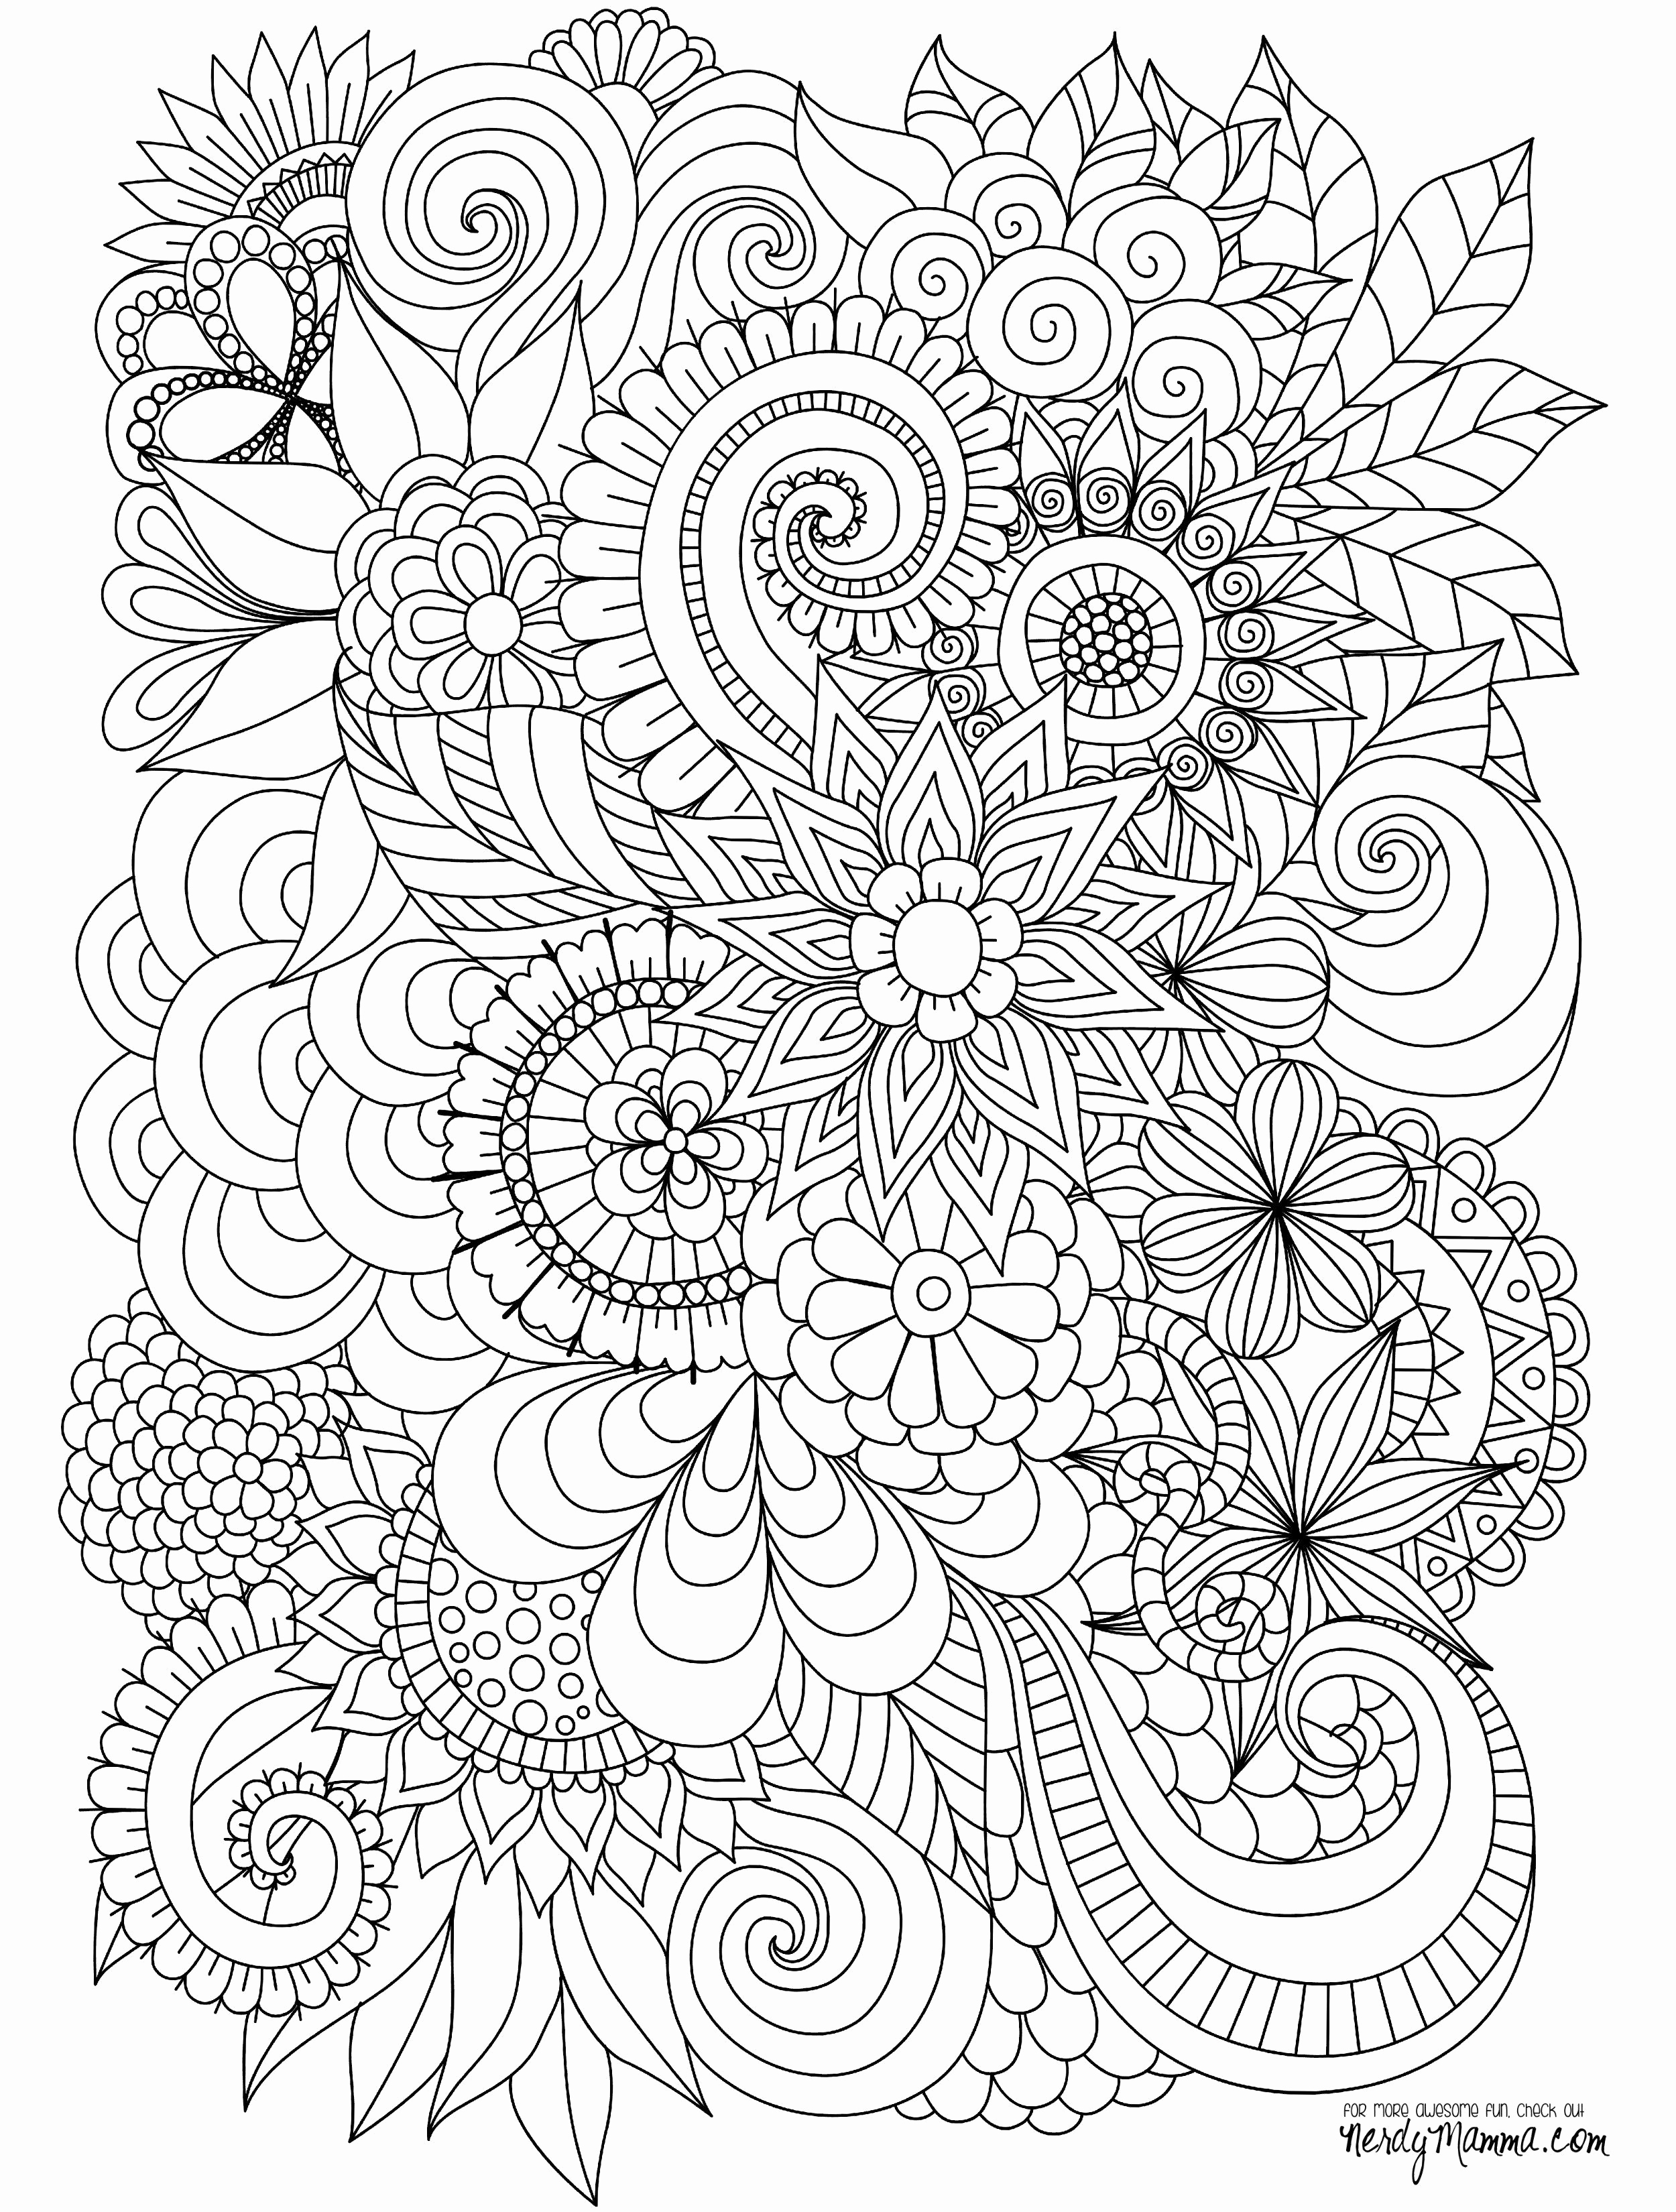 Giant Coloring Pages For Adults Giant Coloring Pages Fun Time